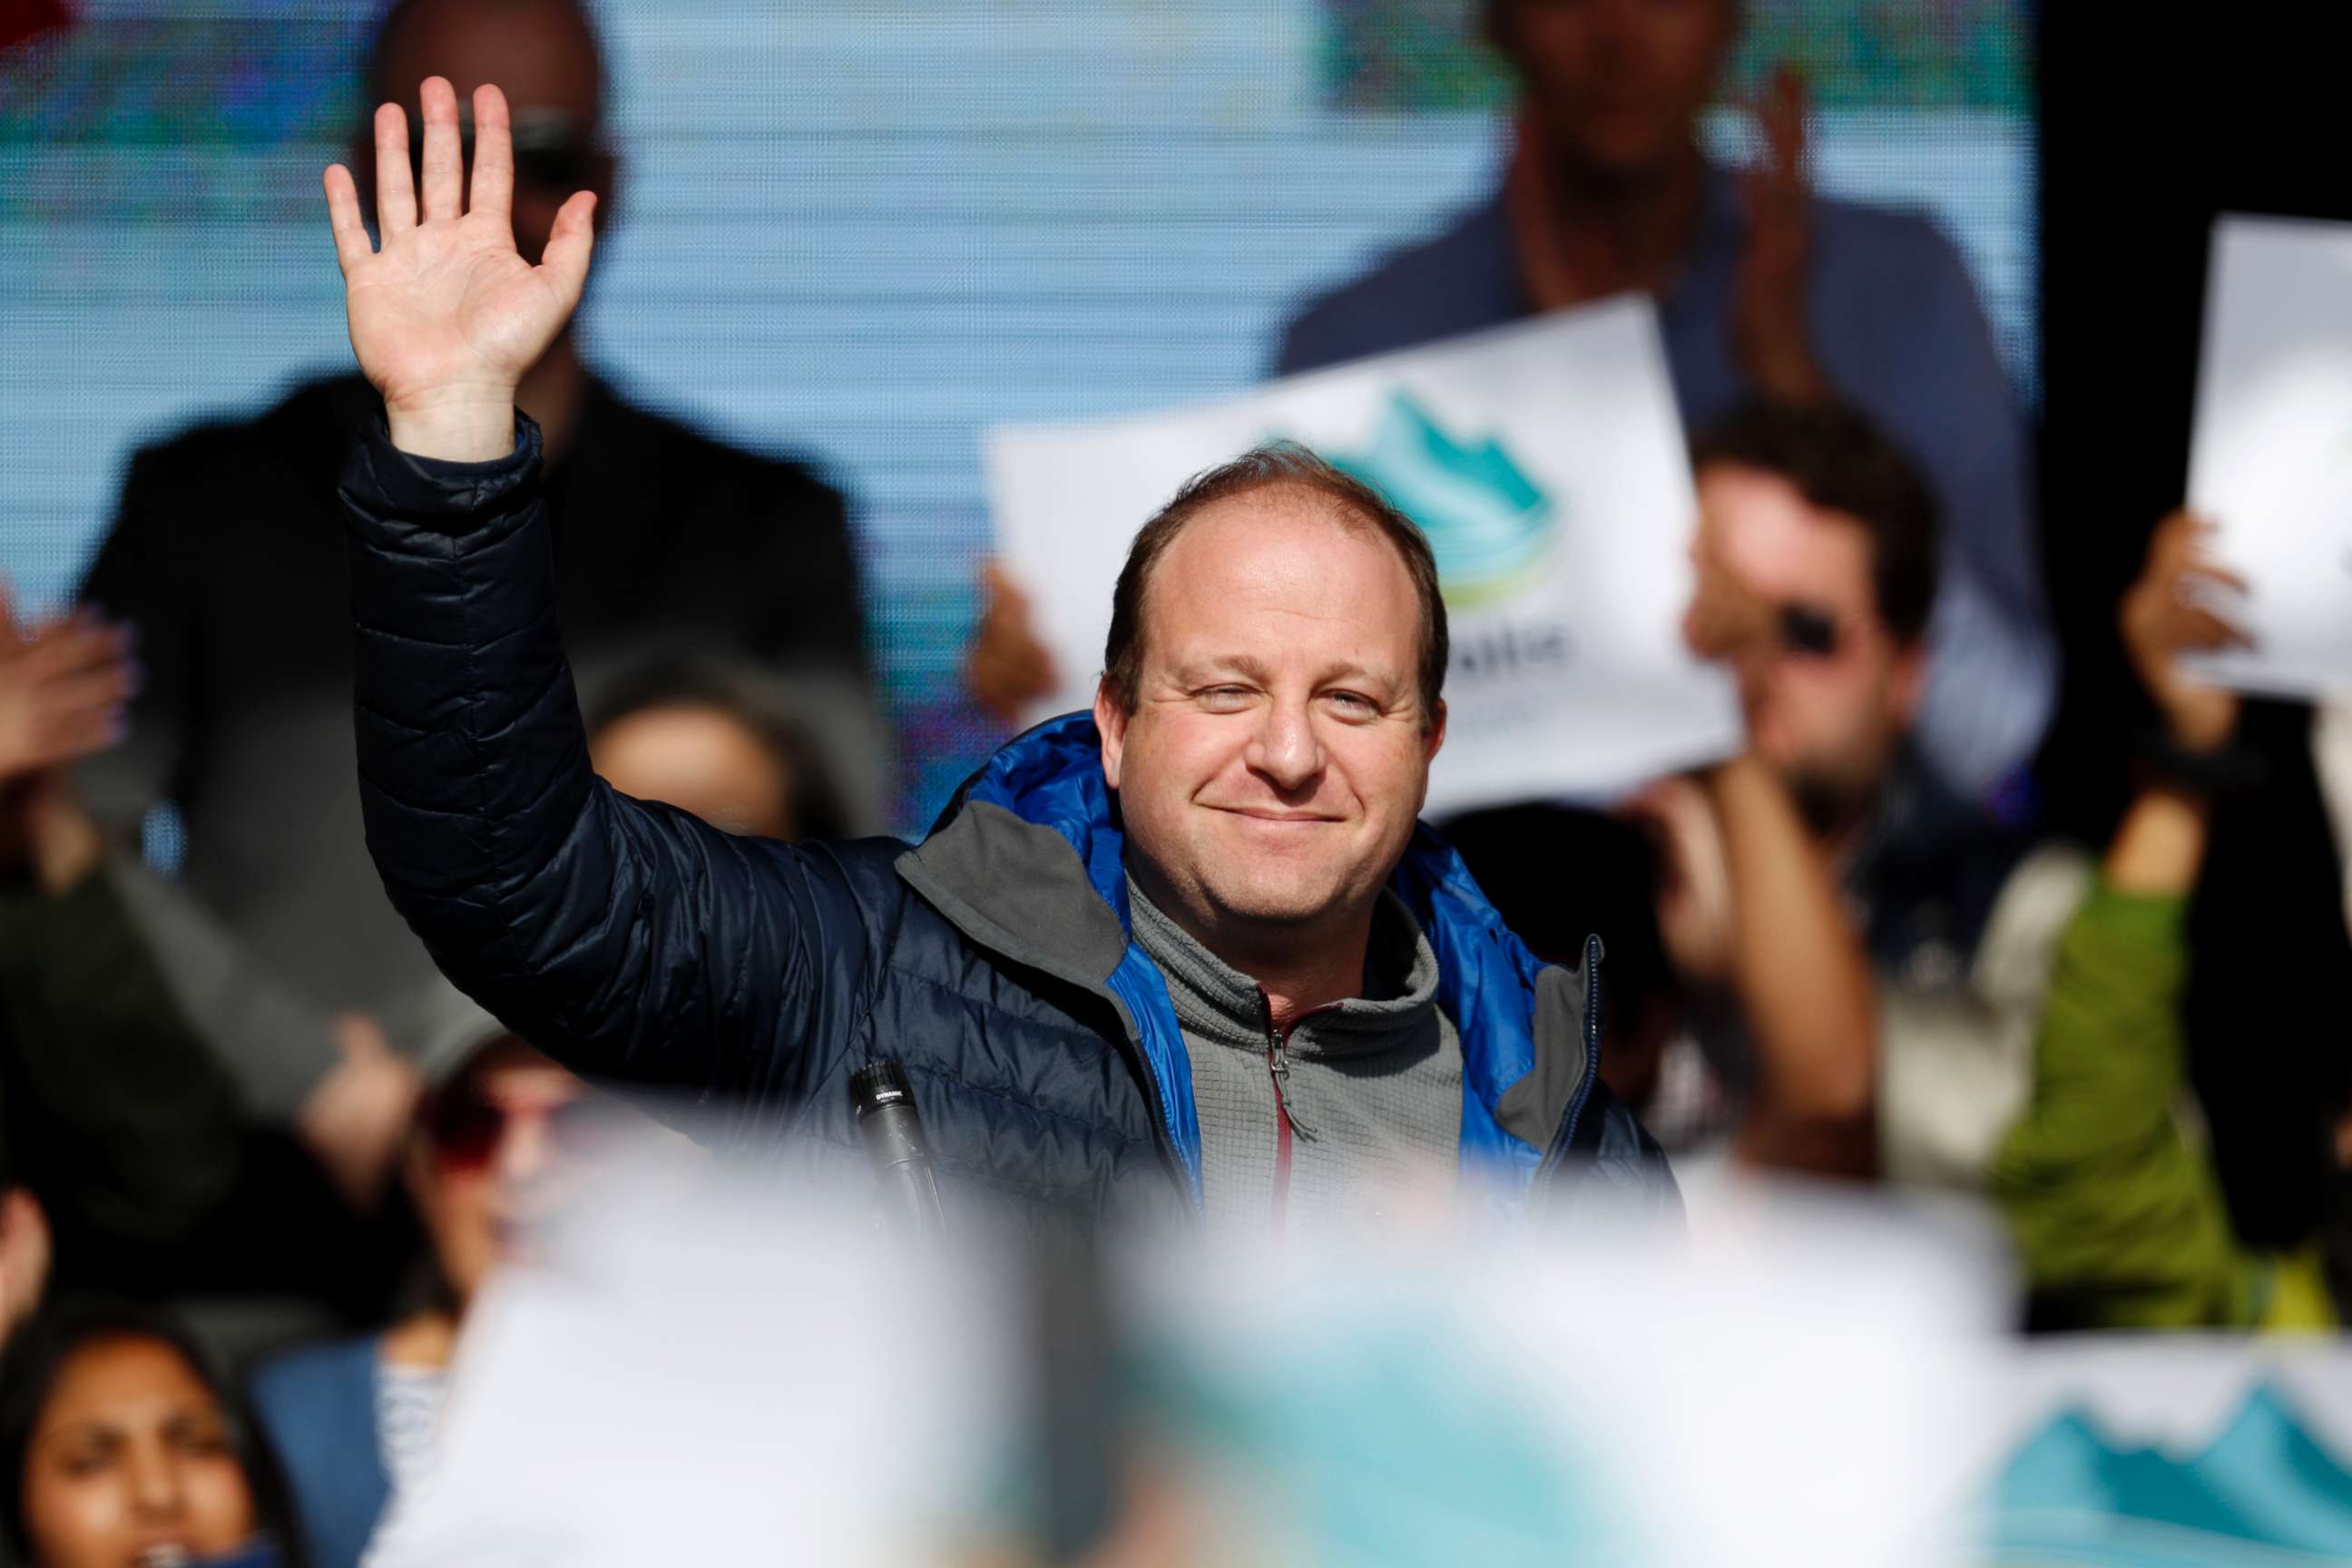 PHOTO: Jared Polis, Colorado's Democratic candidate for governor, waves to the crowd during a rally with young voters on the campus of the University of Colorado, Oct. 24, 2018, in Boulder, Colo.